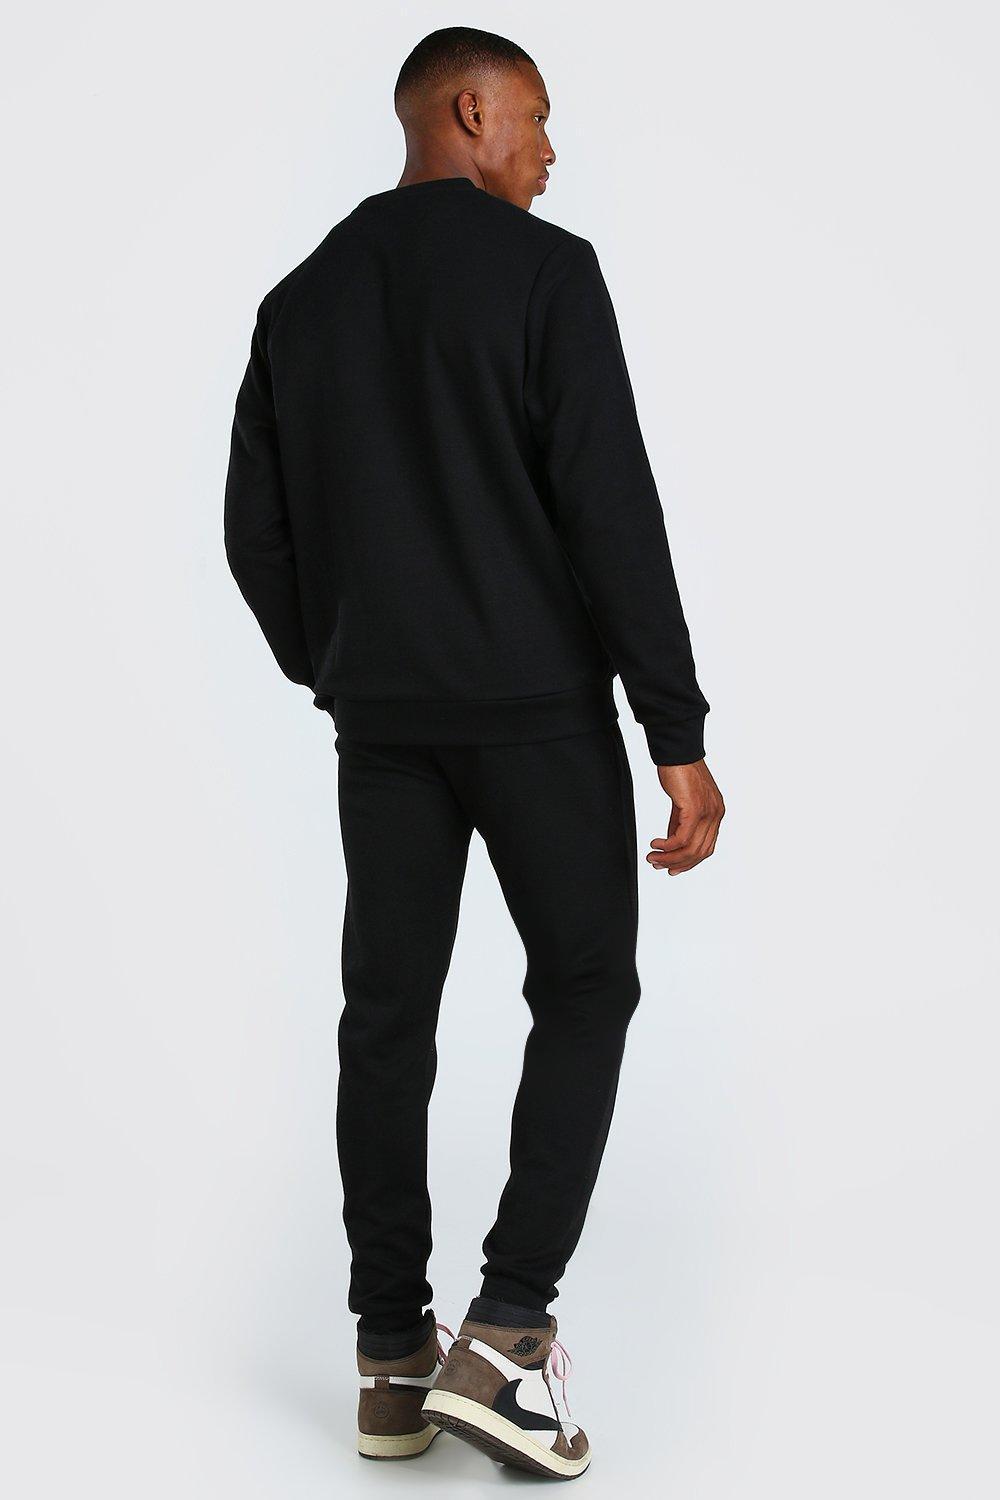 BoohooMAN Cotton Man Scuba Sweater Tracksuit With Pintucks in Black for ...